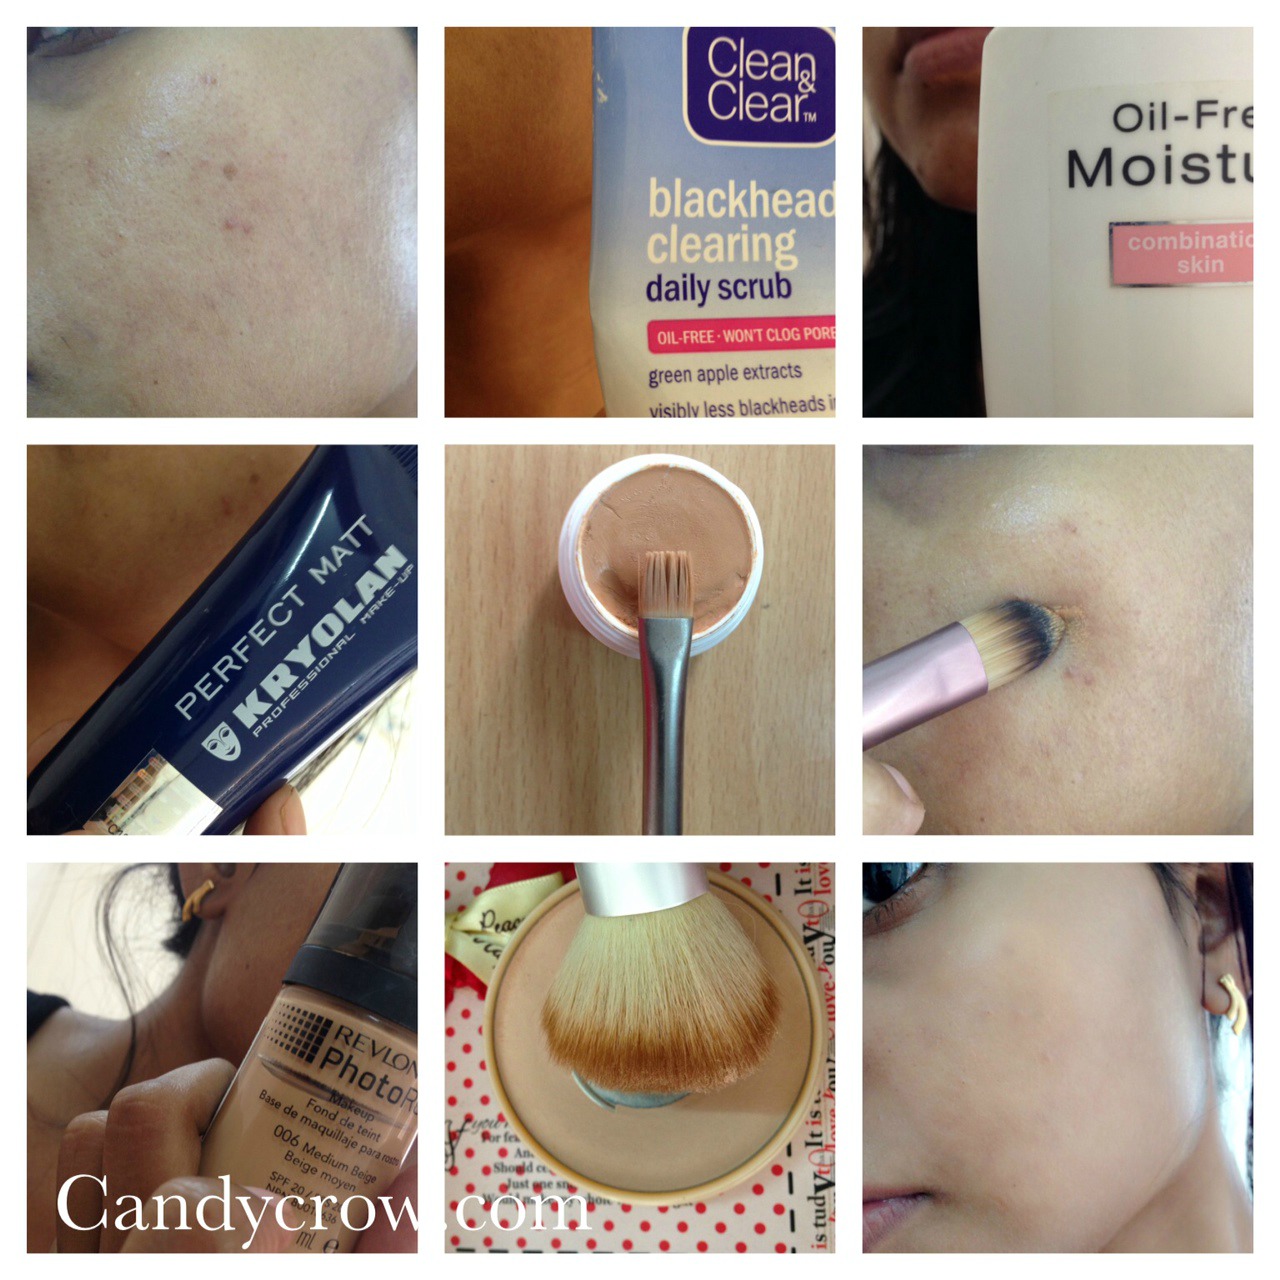 How to Cover Blemishes and Acne Scars with Makeup ? with photos